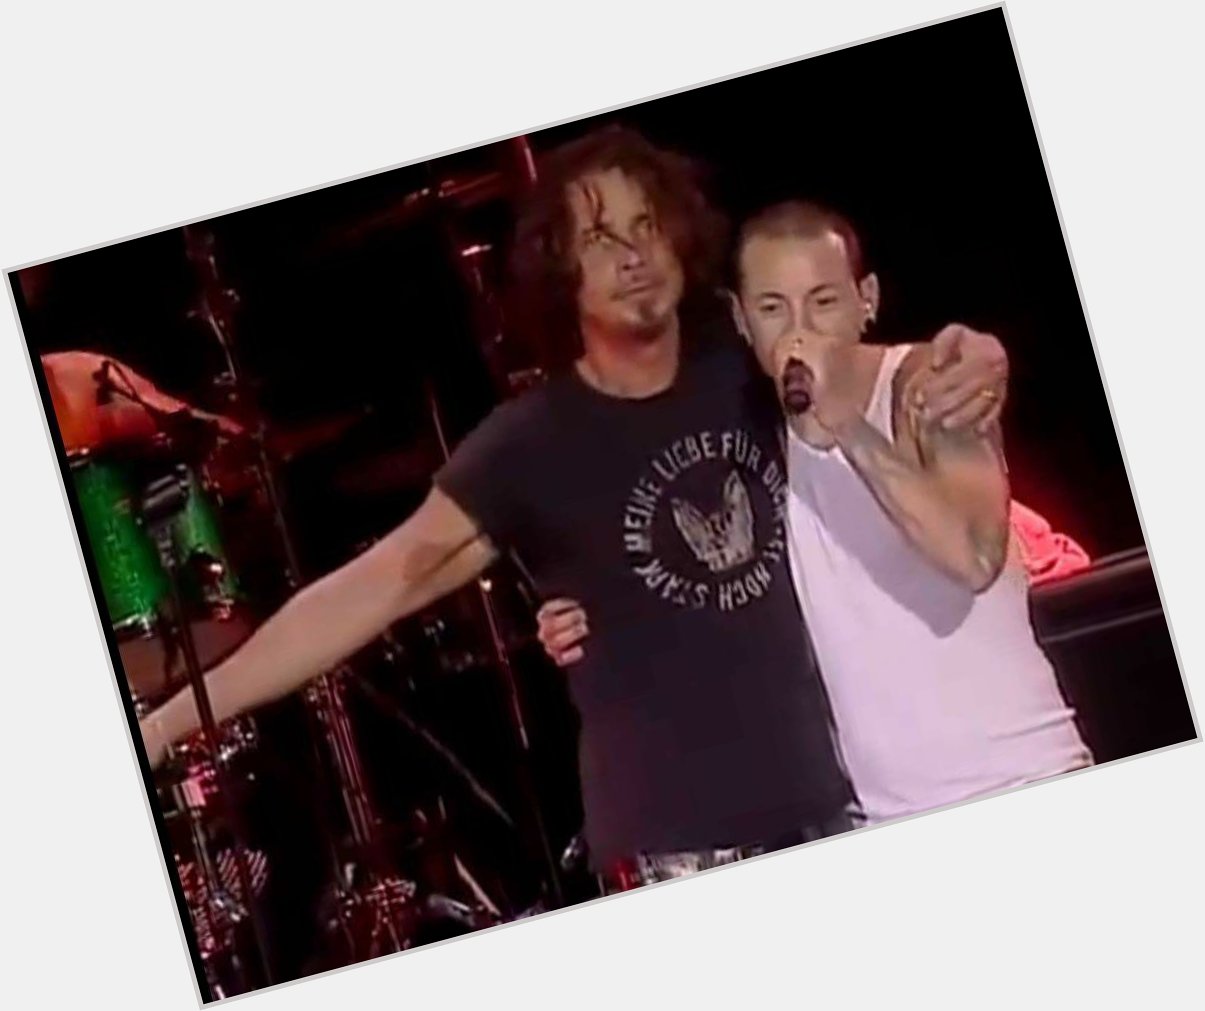 The music wherever these two souls are, is going to be beautiful. happy birthday chris cornell &   